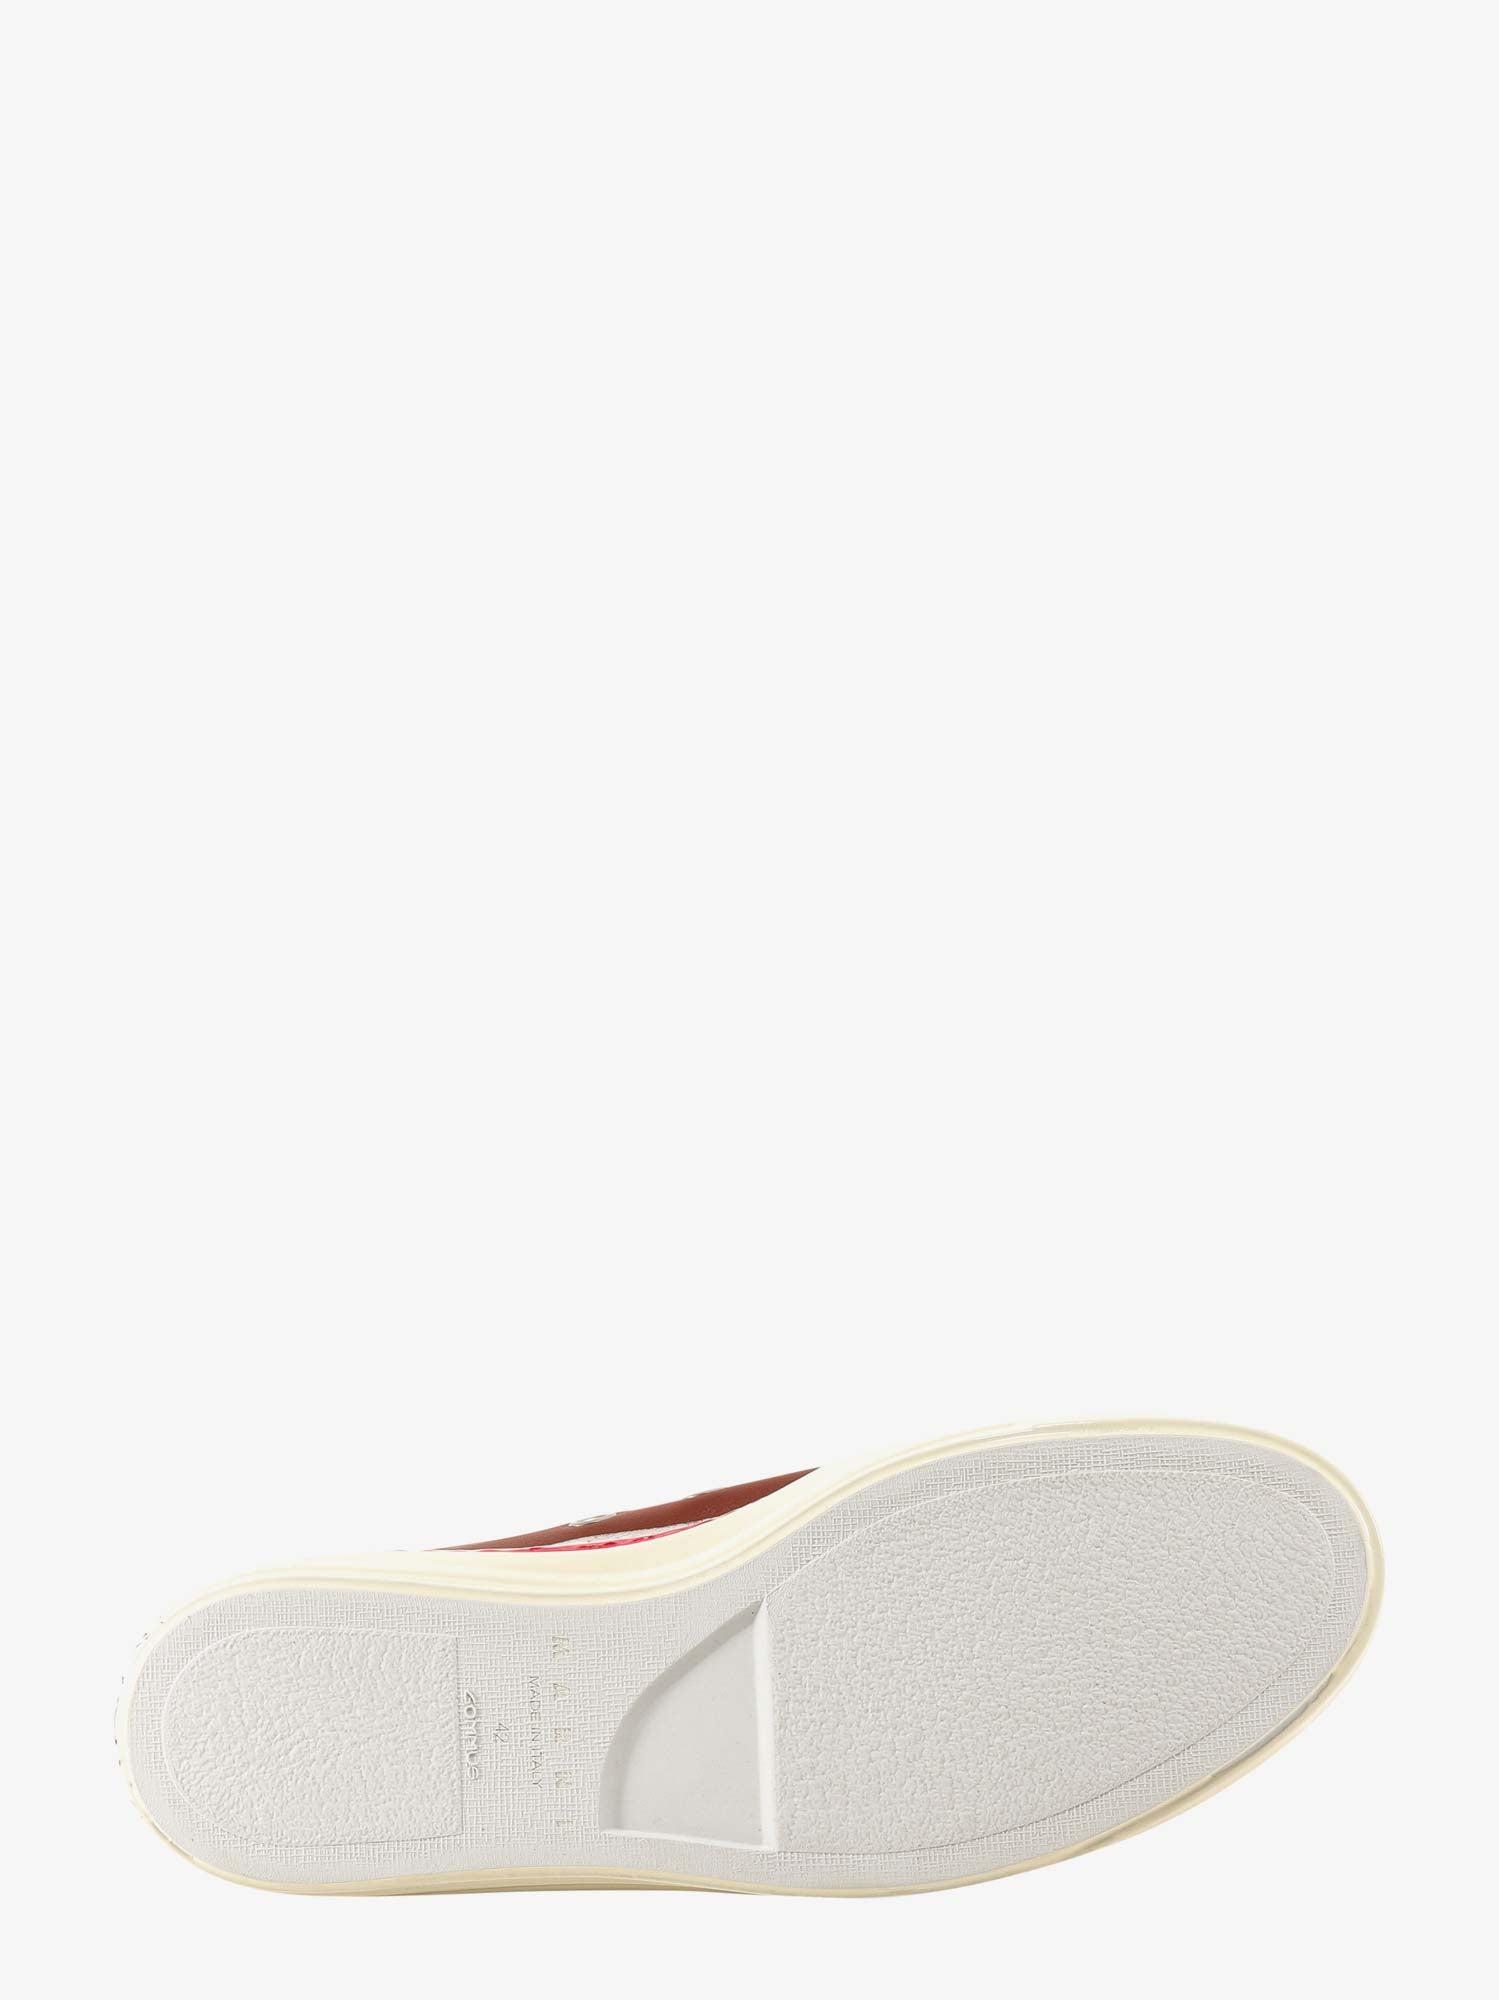 Marni Leather Gooey High-top Sneakers for Men - Lyst